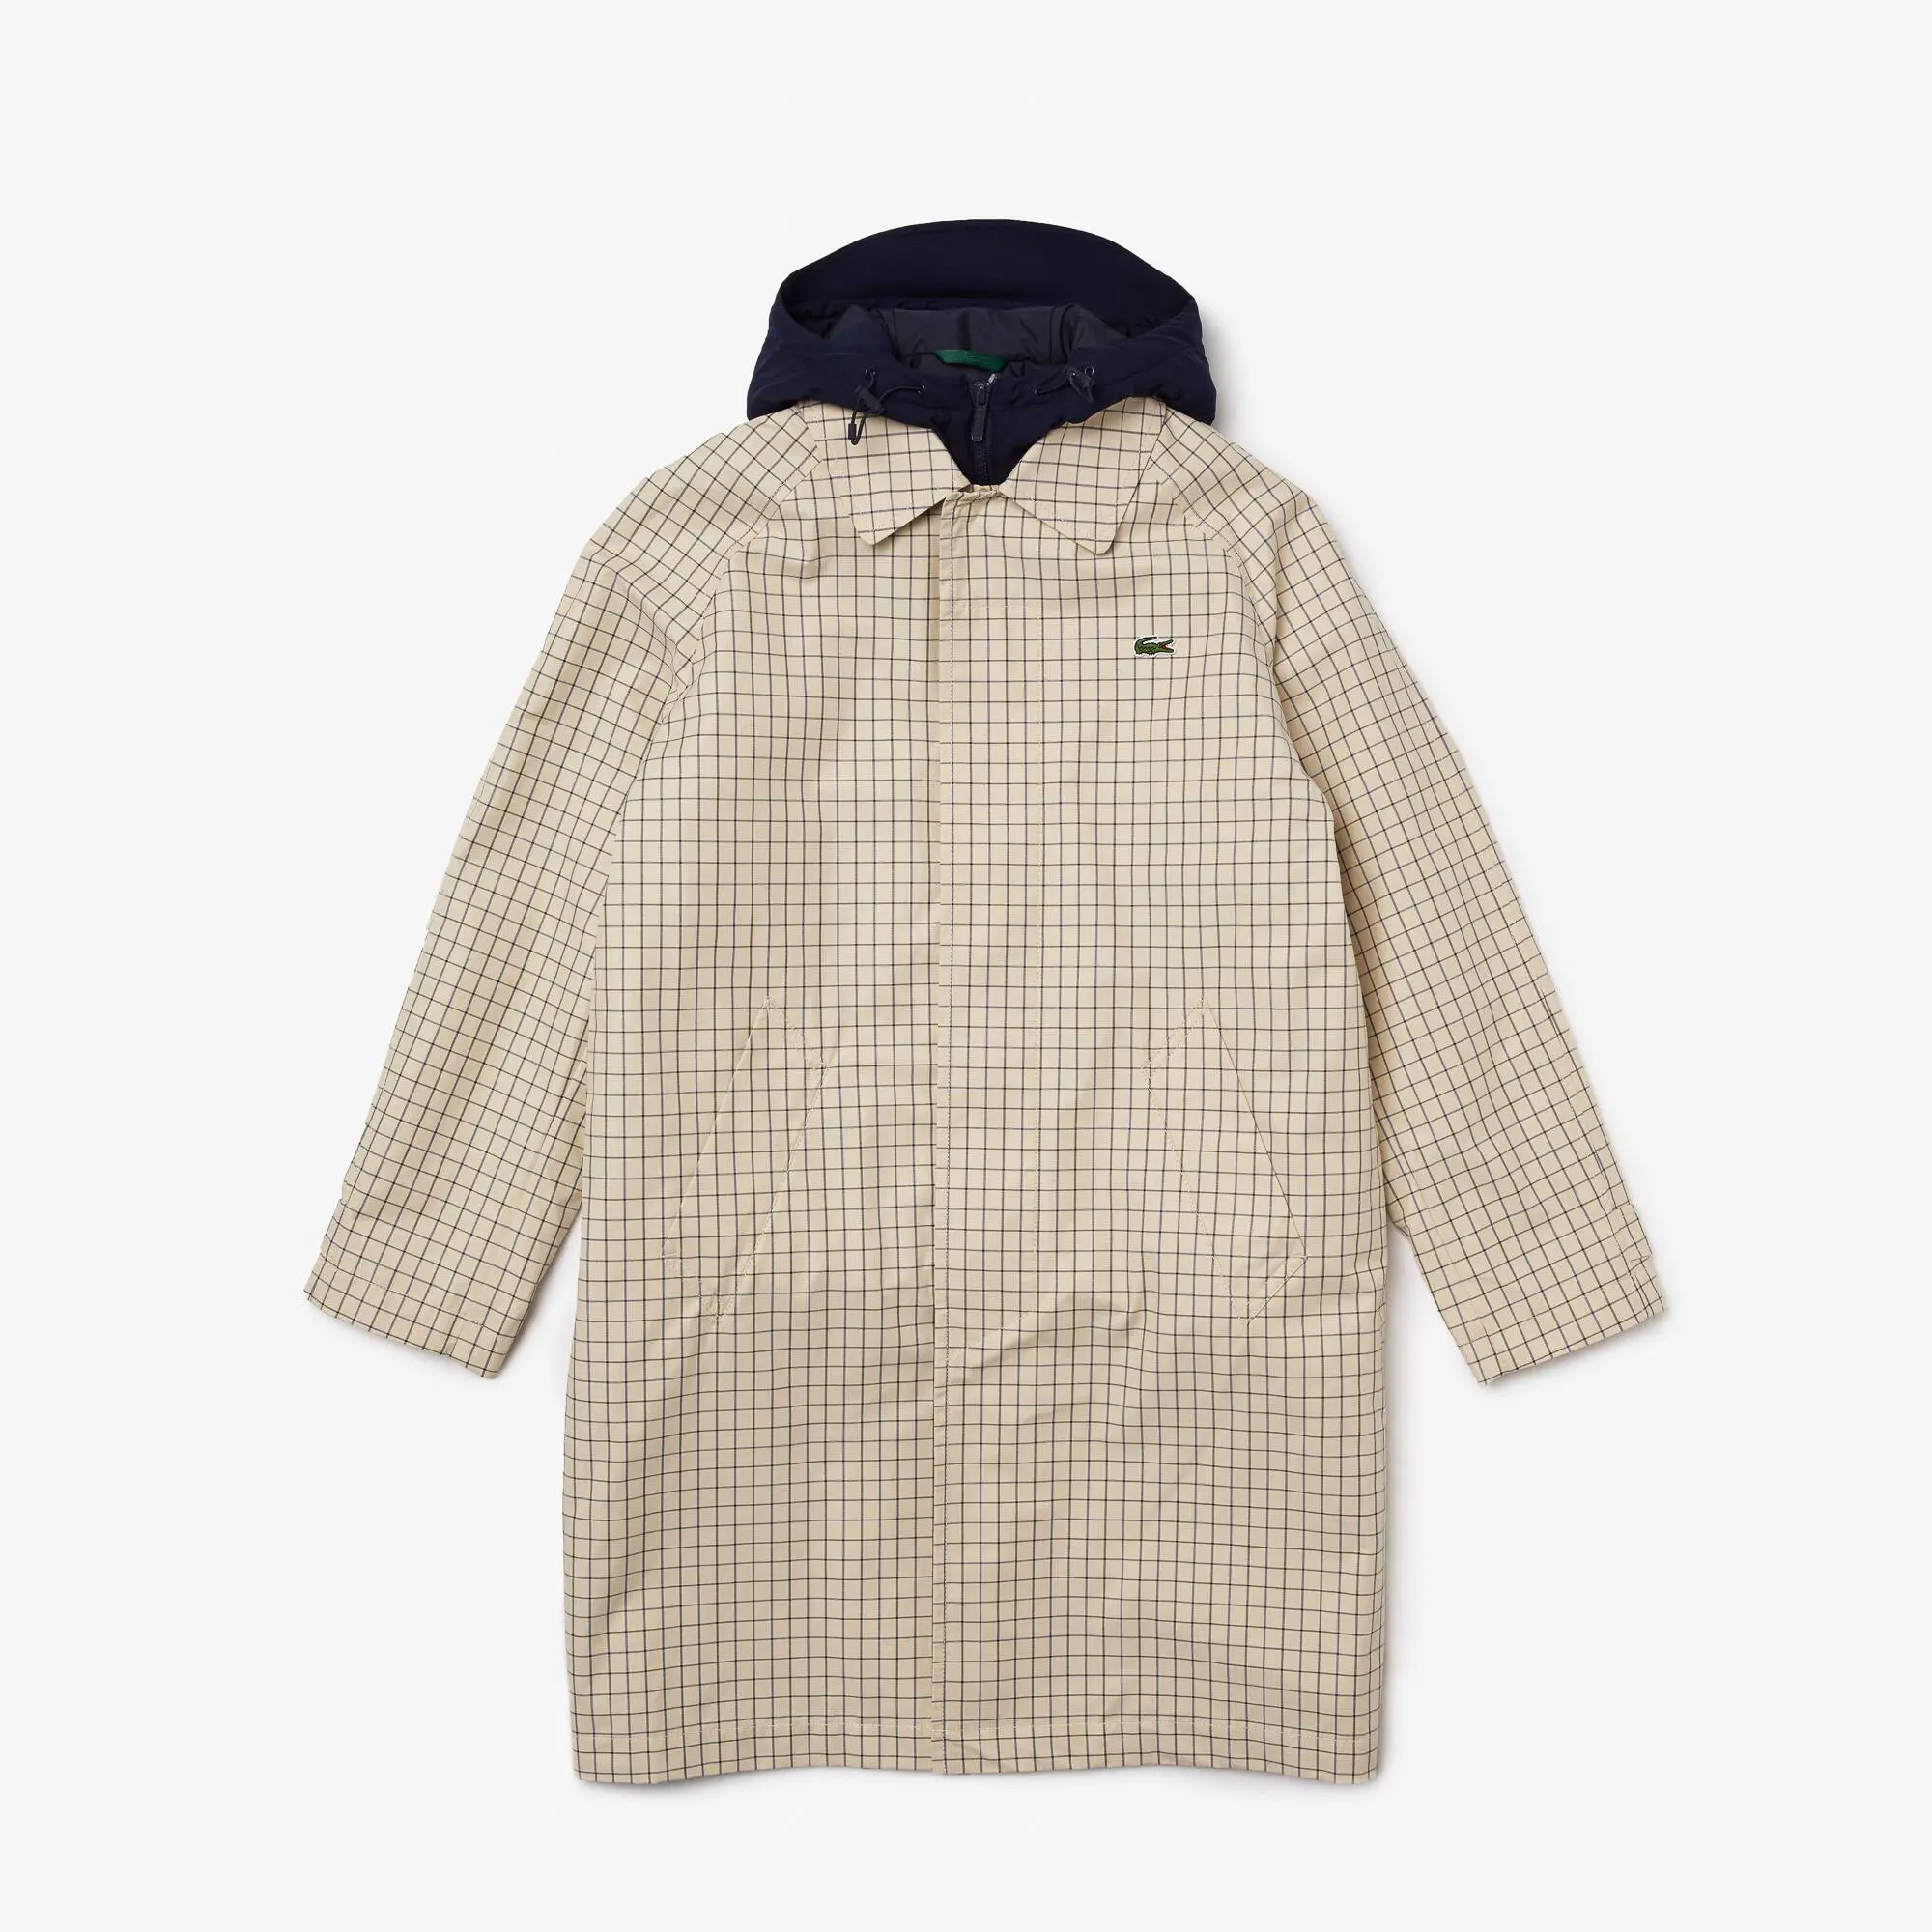 Lacoste Men’s Heritage 3-in-1 Check Trench. 2